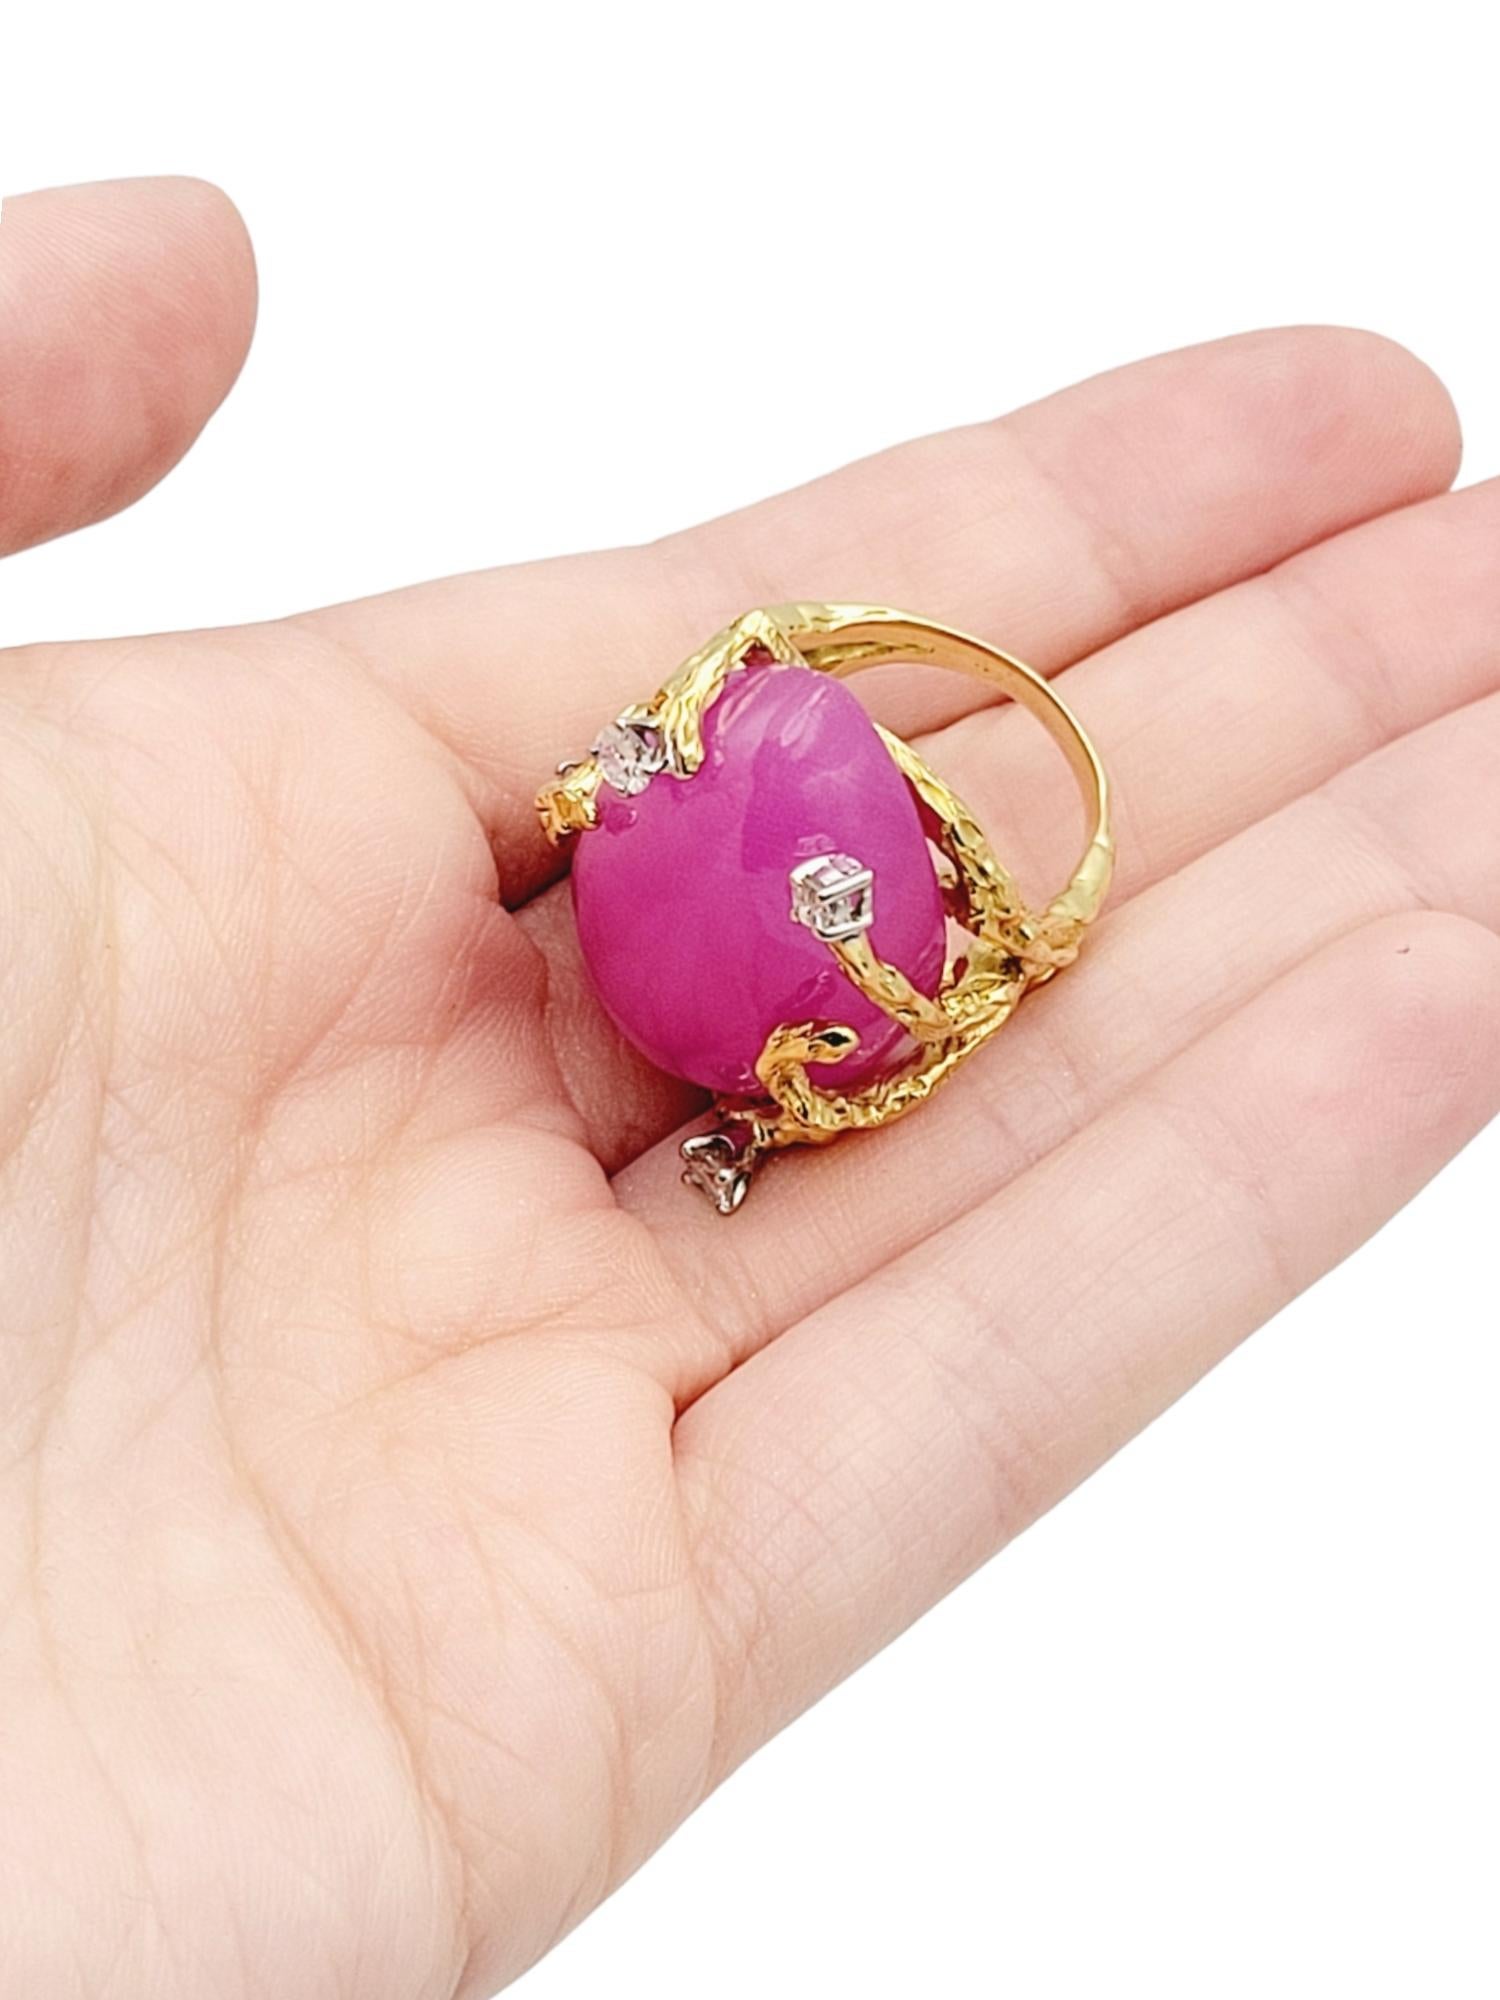 Huge Pear Cabochon Lab Created Pink Sapphire Branch Design Ring in 14 Karat Gold 6